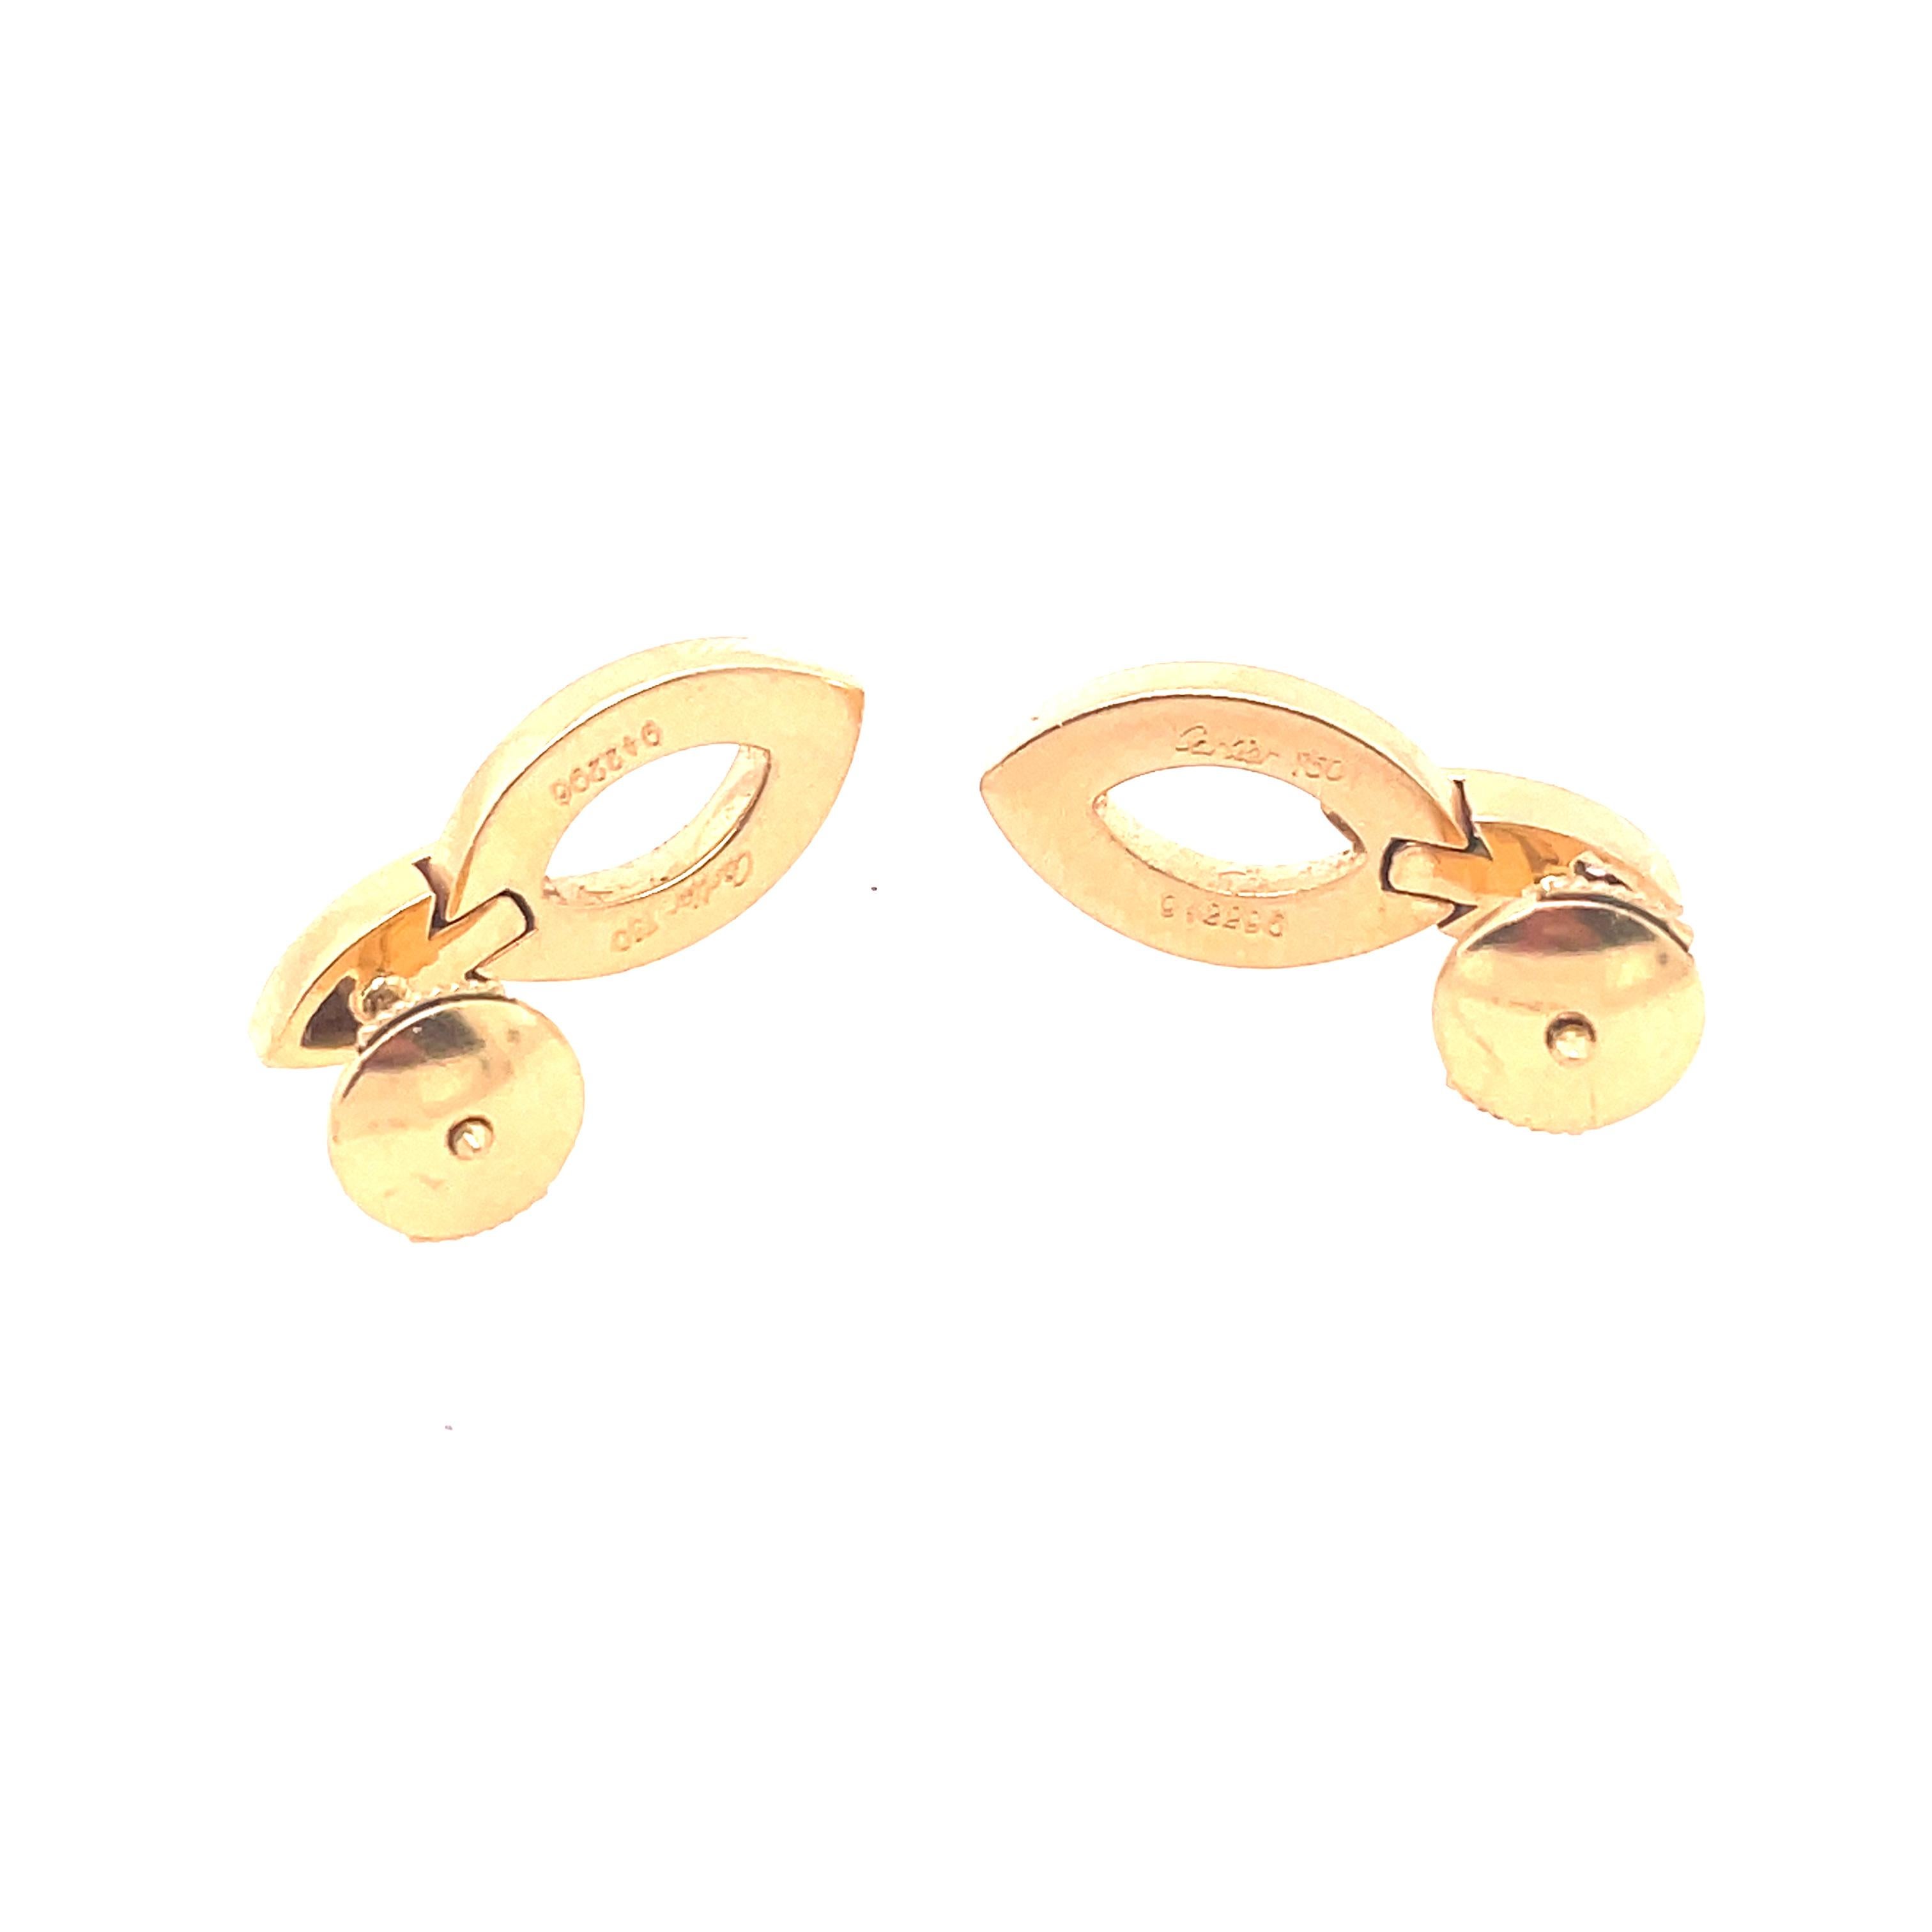 Cartier 18kt yellow gold Diade earrings with diamond accents
Six VVS1 Clarity with EF Coloring
